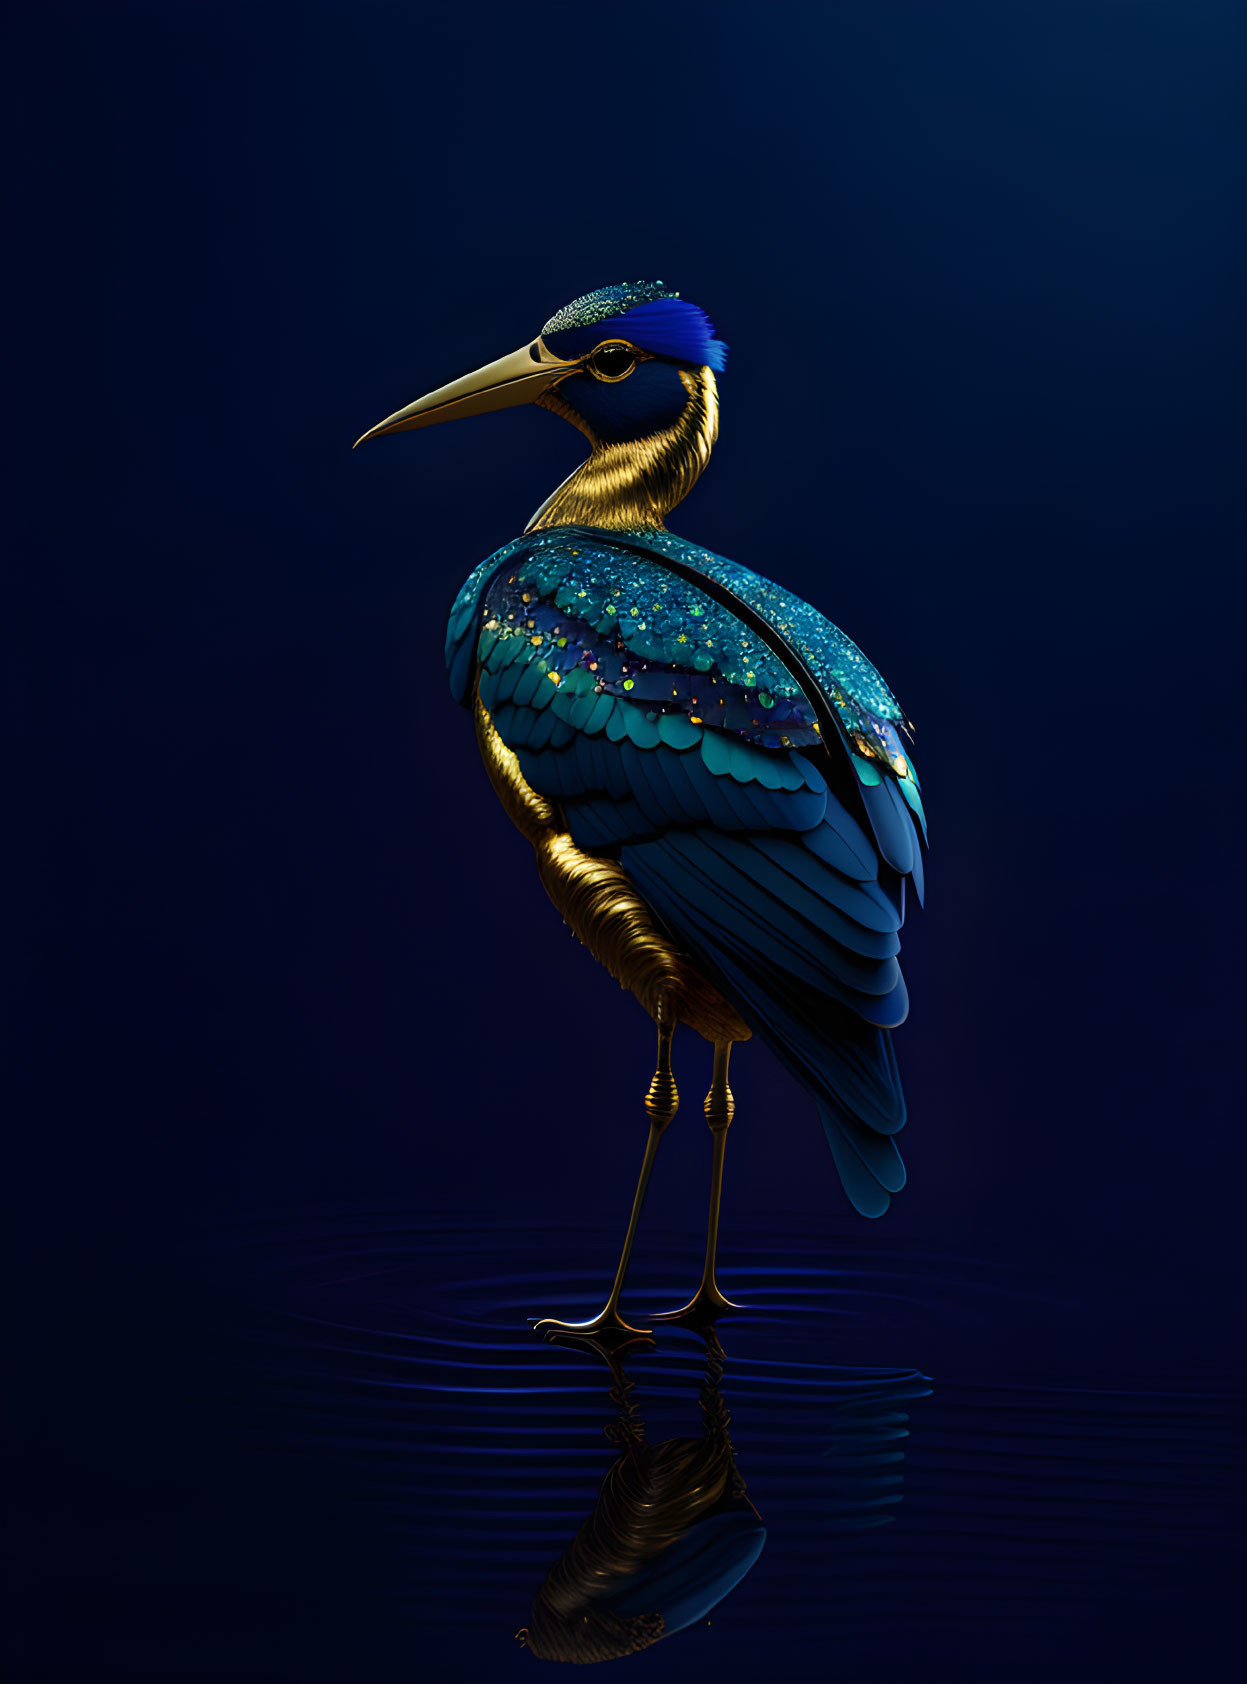 Stylized bird with blue and gold feathers on dark surface